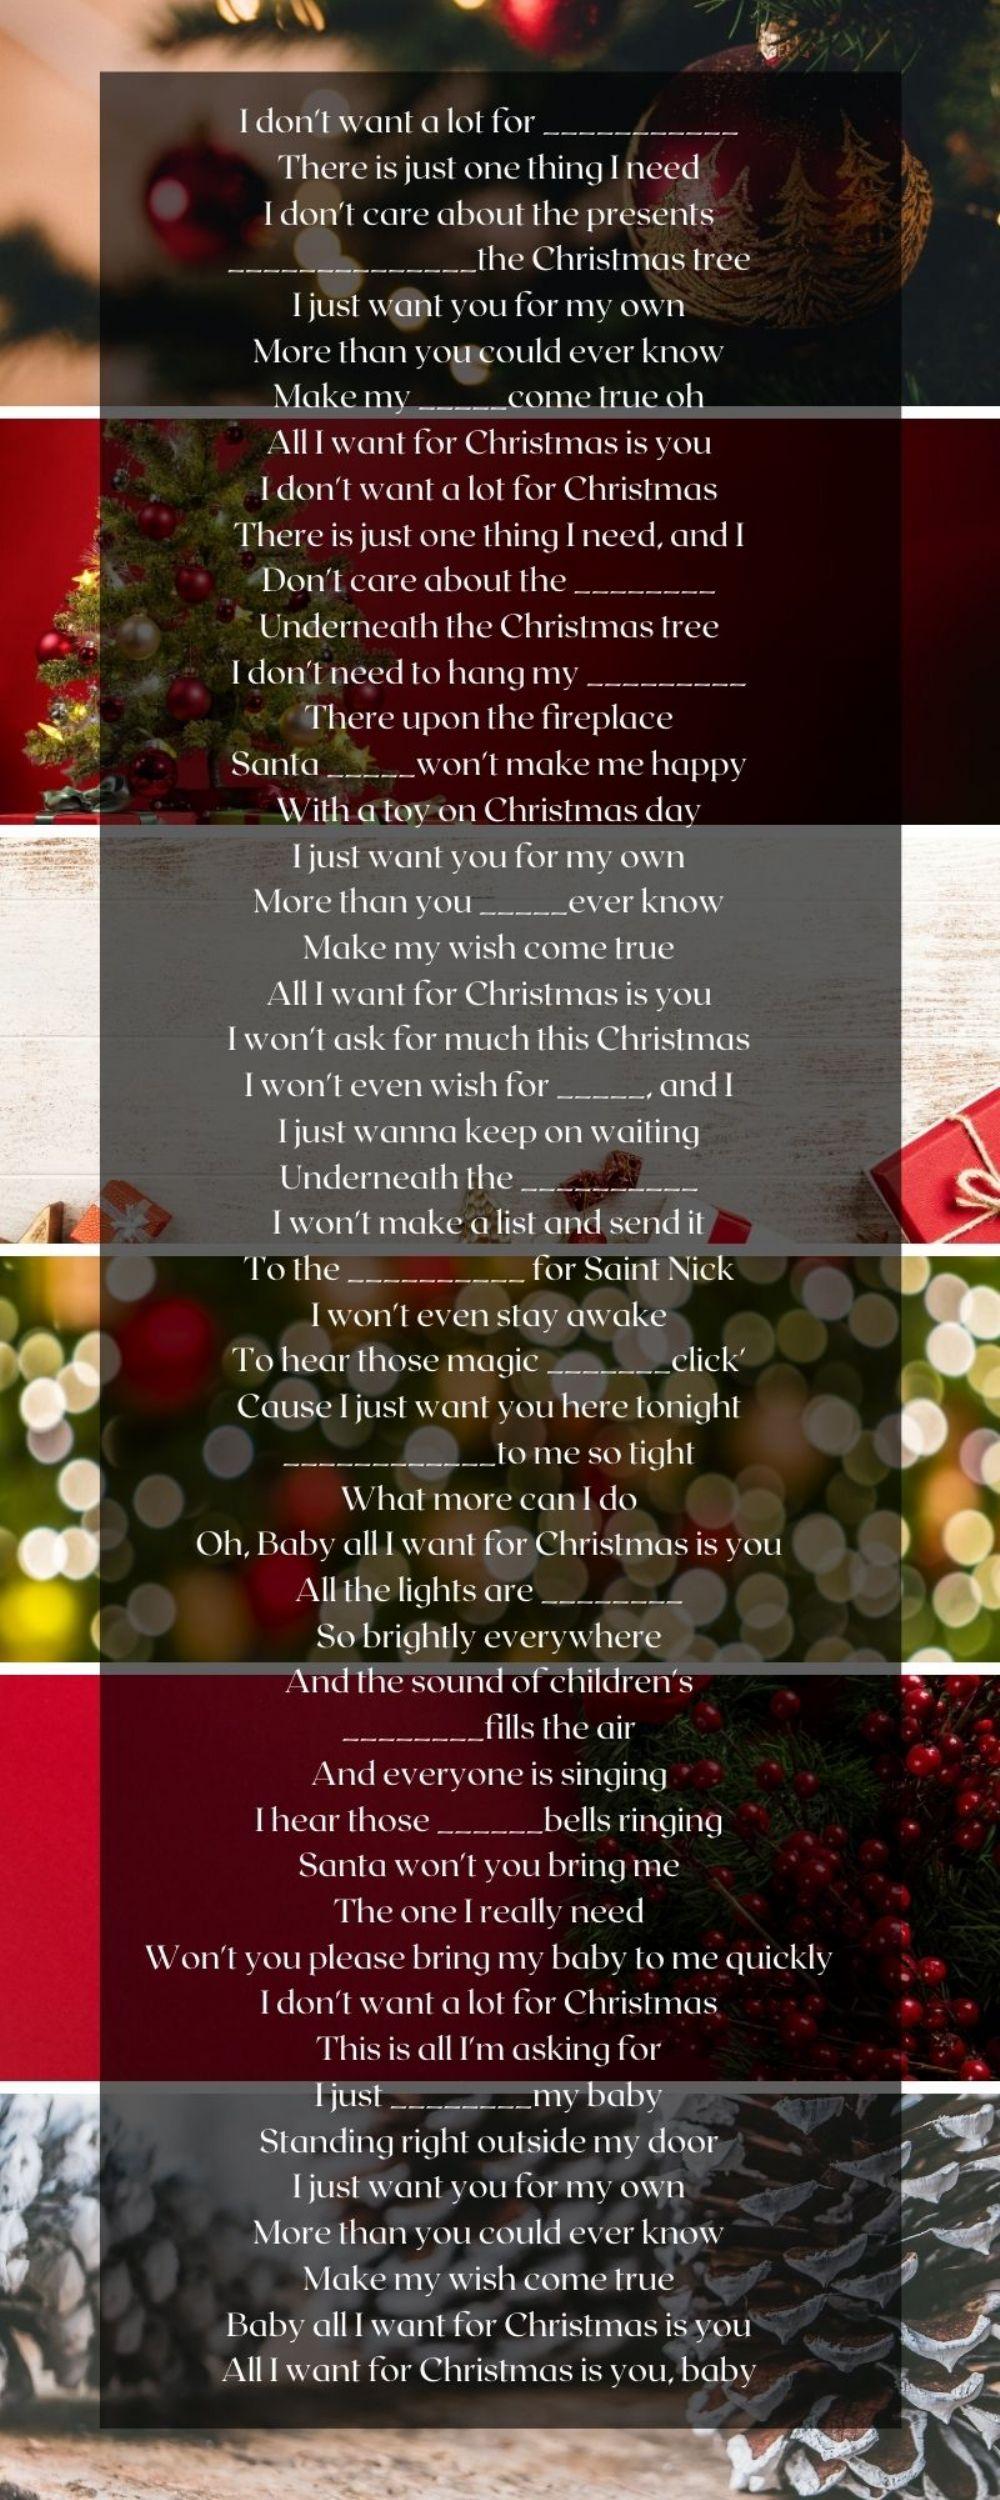 All i want for christmas song